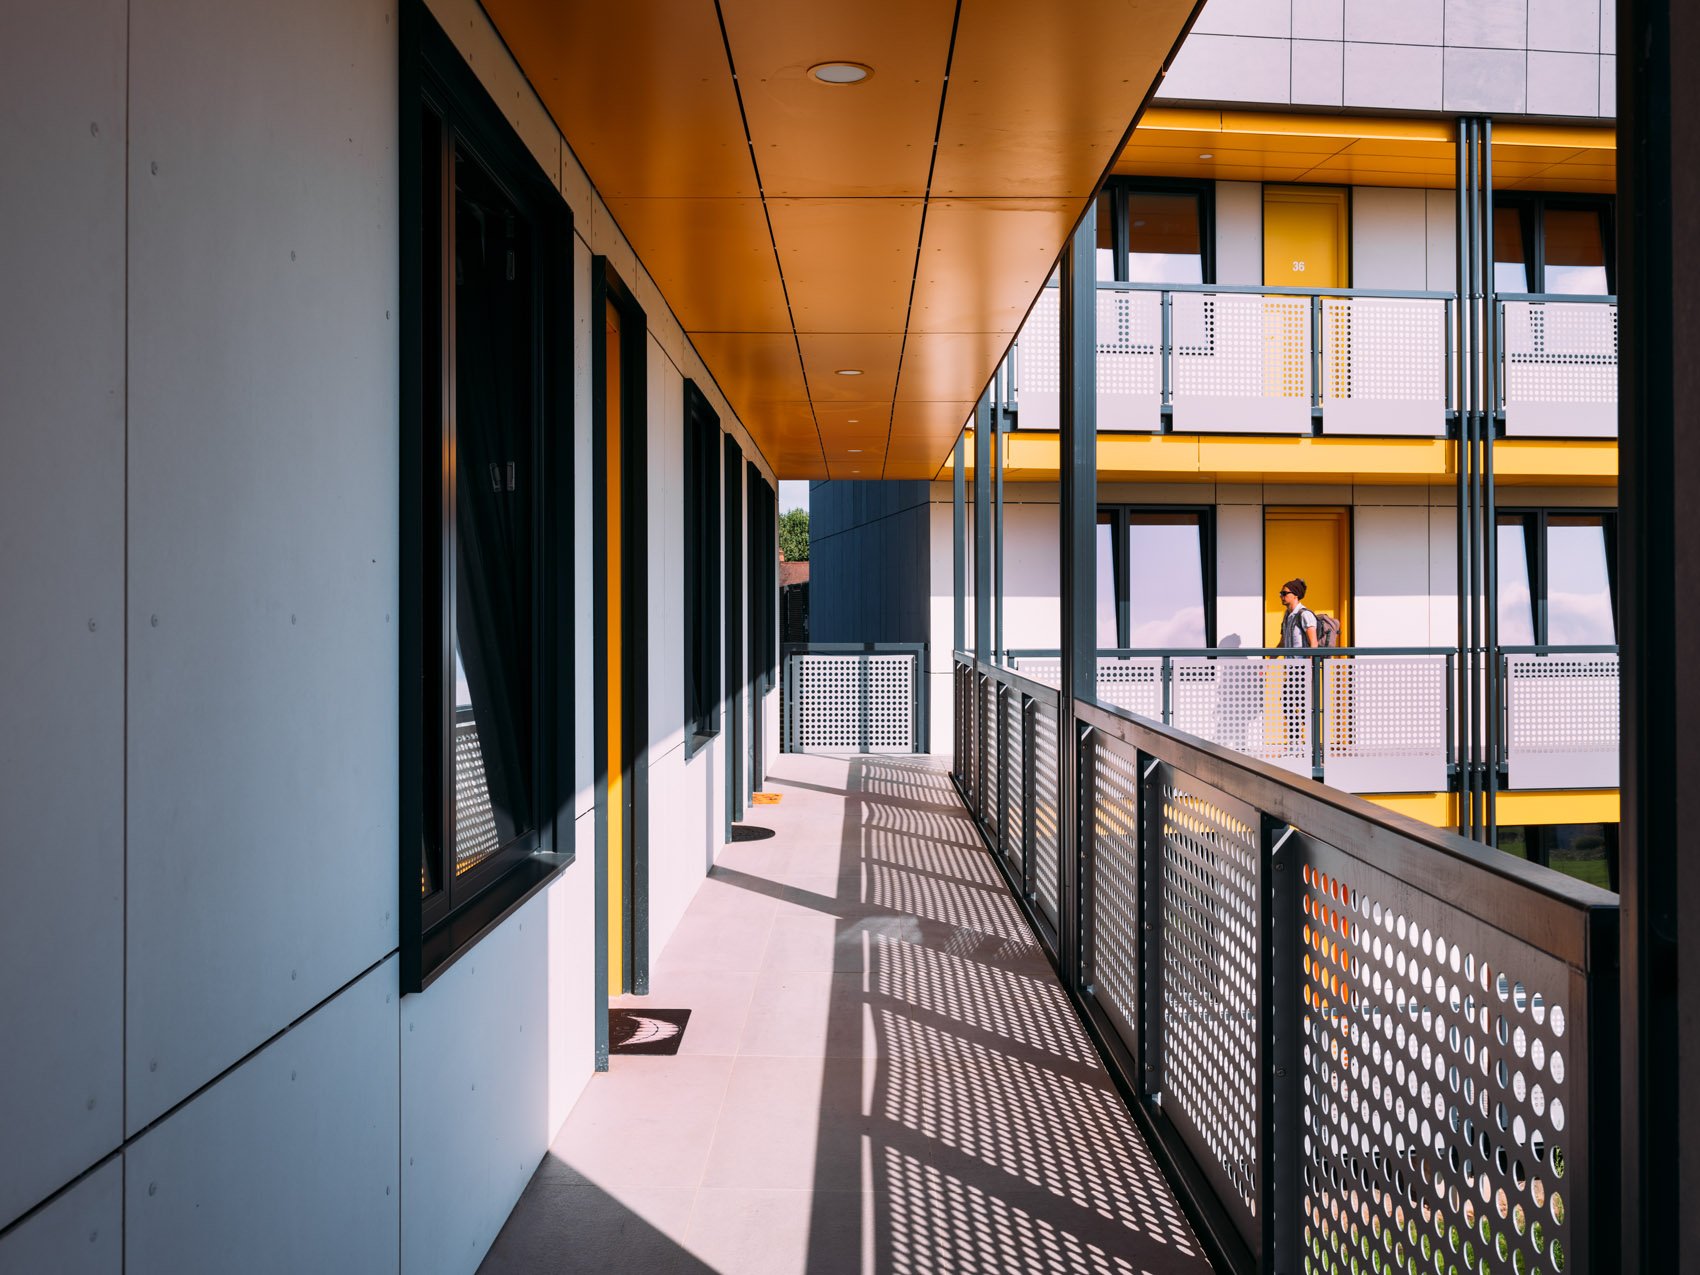  YMCA Thames Gateway. Photo: Joas Souza. Project by RSHP 